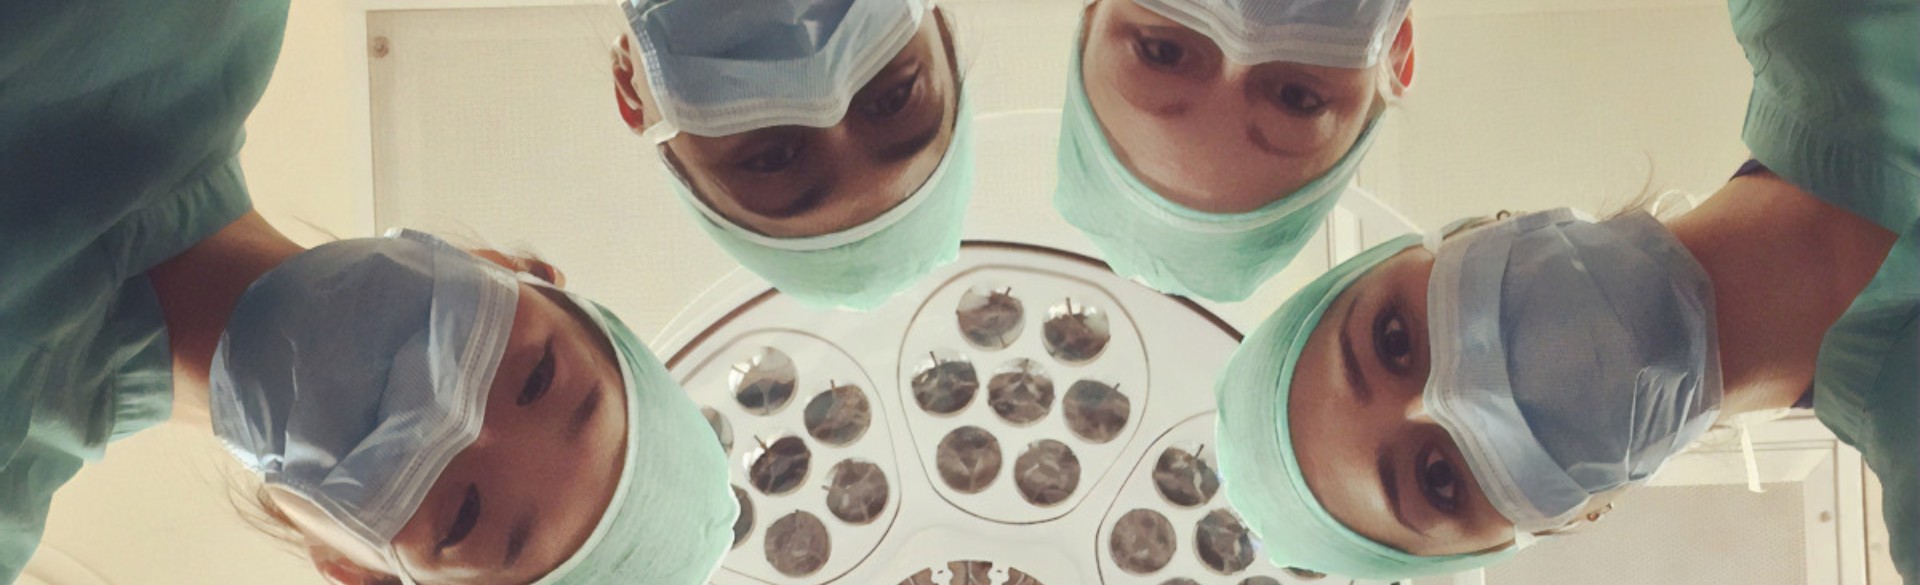 People wearing surgical gear looking down on operating table